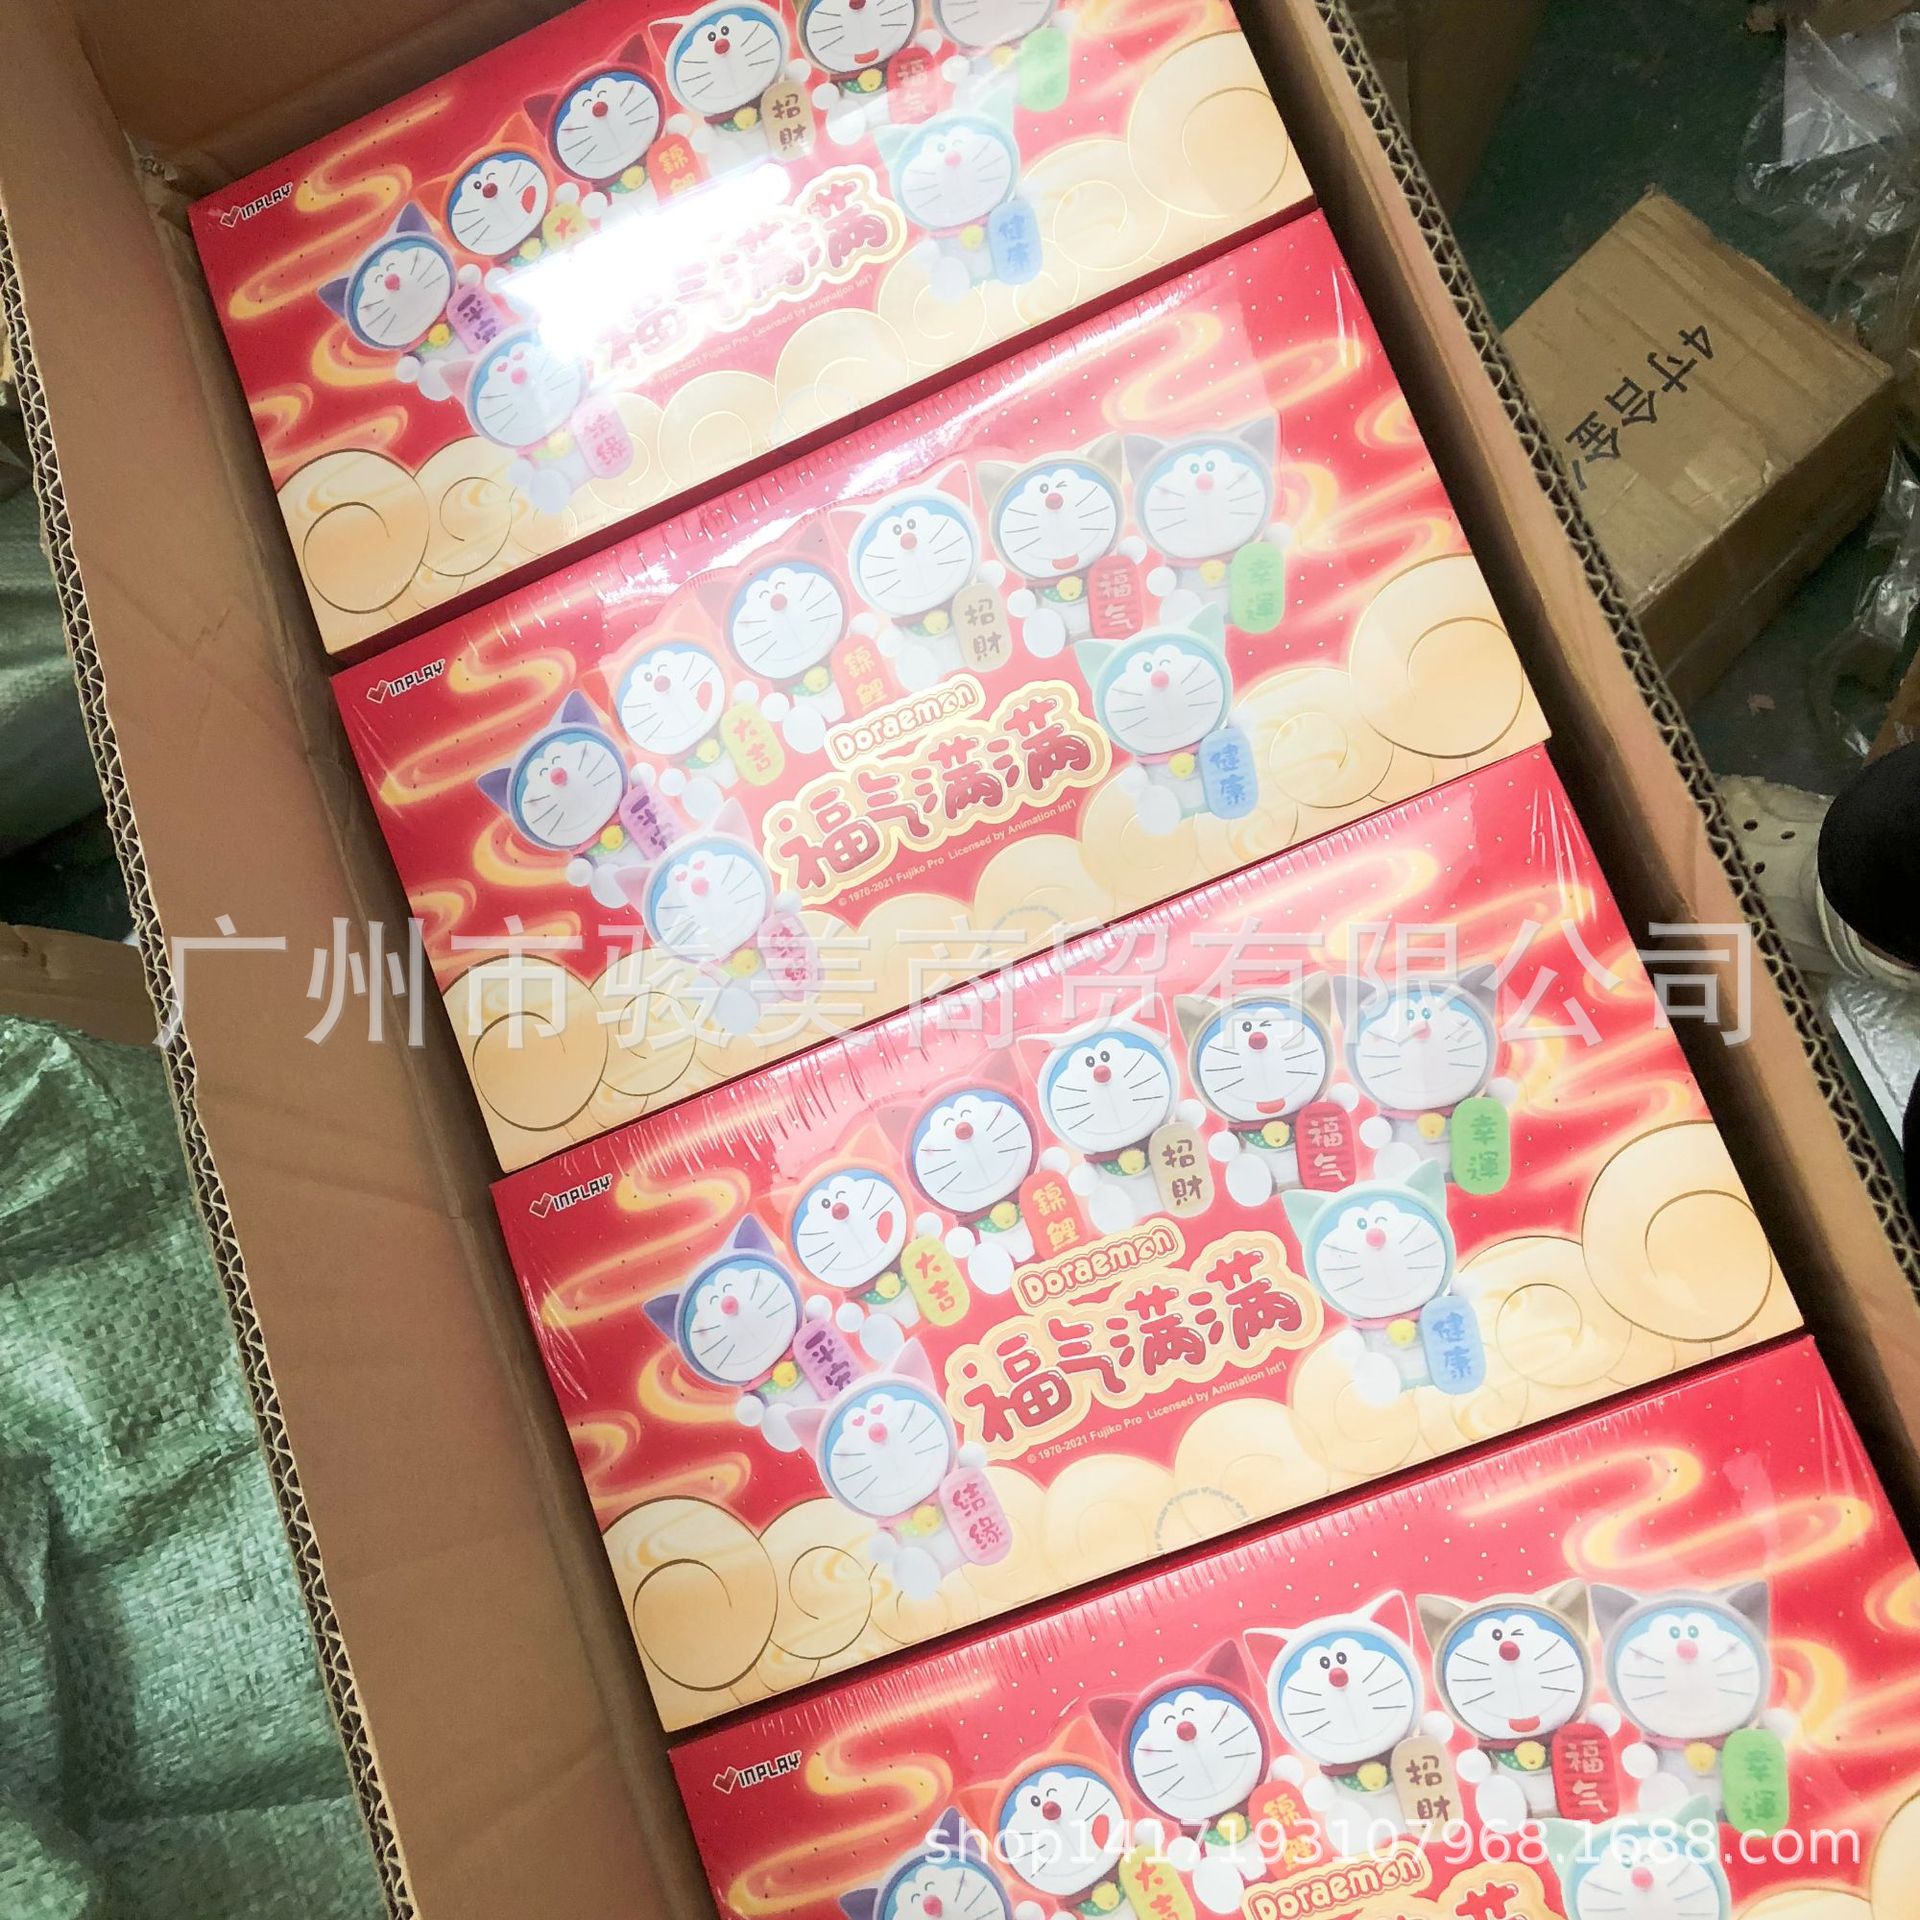 in stock and fast delivery boxes of blessing full of fashion blind box doraemon garage kits ornaments gift leftover stock